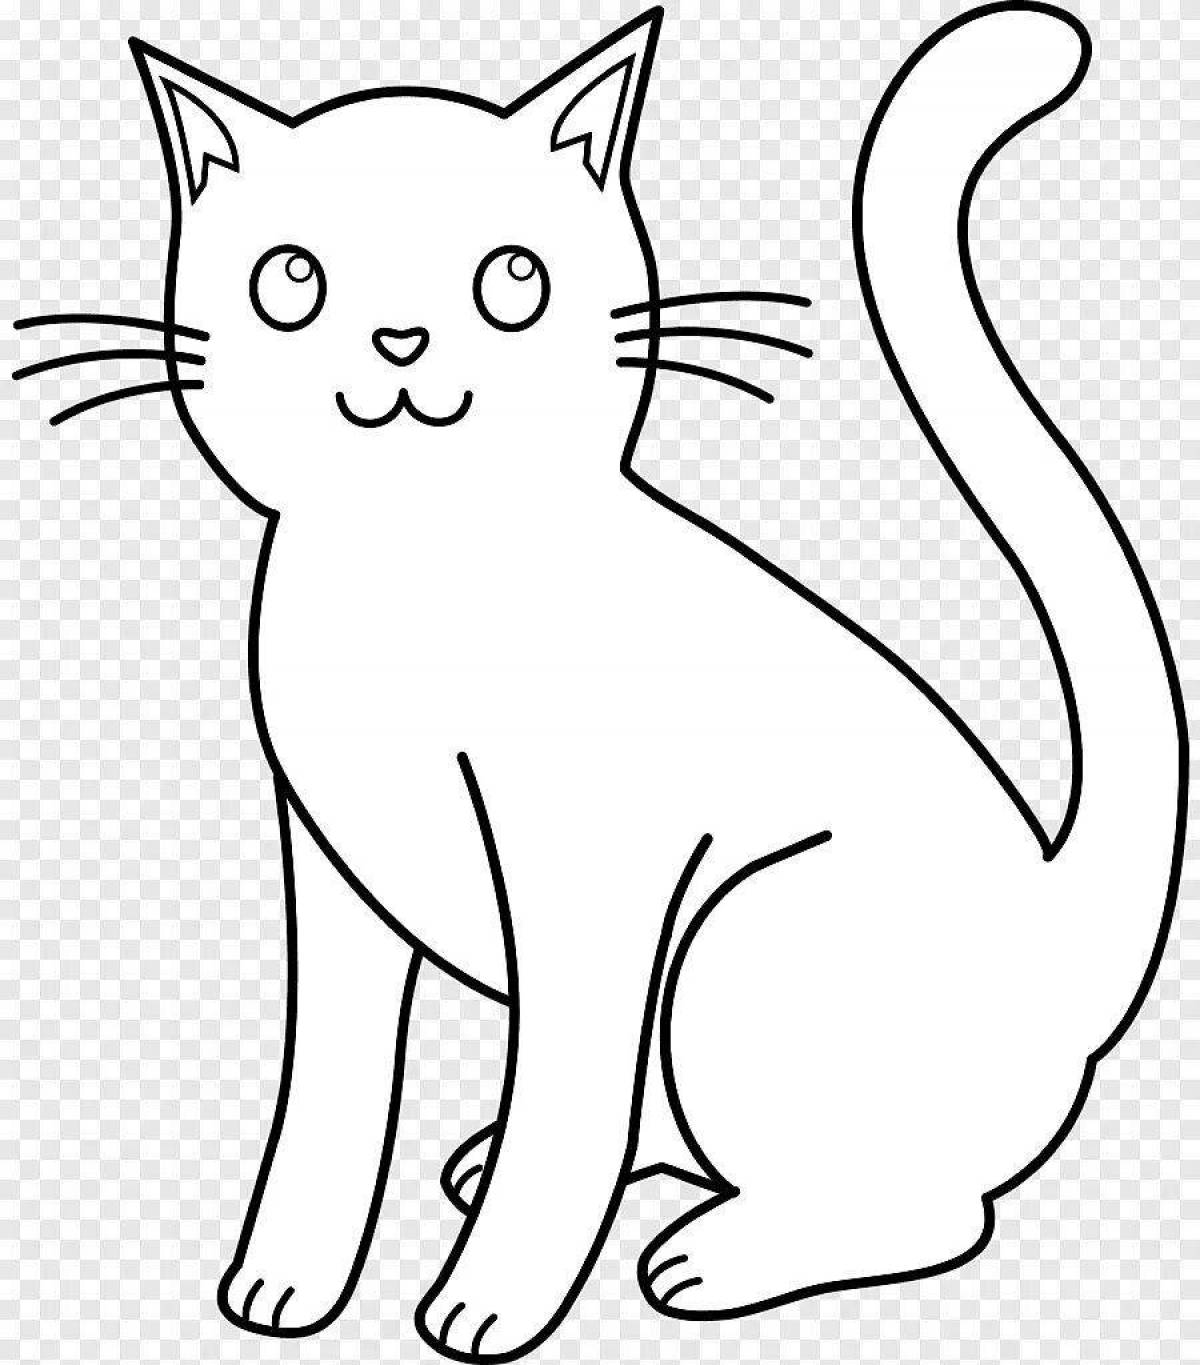 Coloring book fluffy black cat